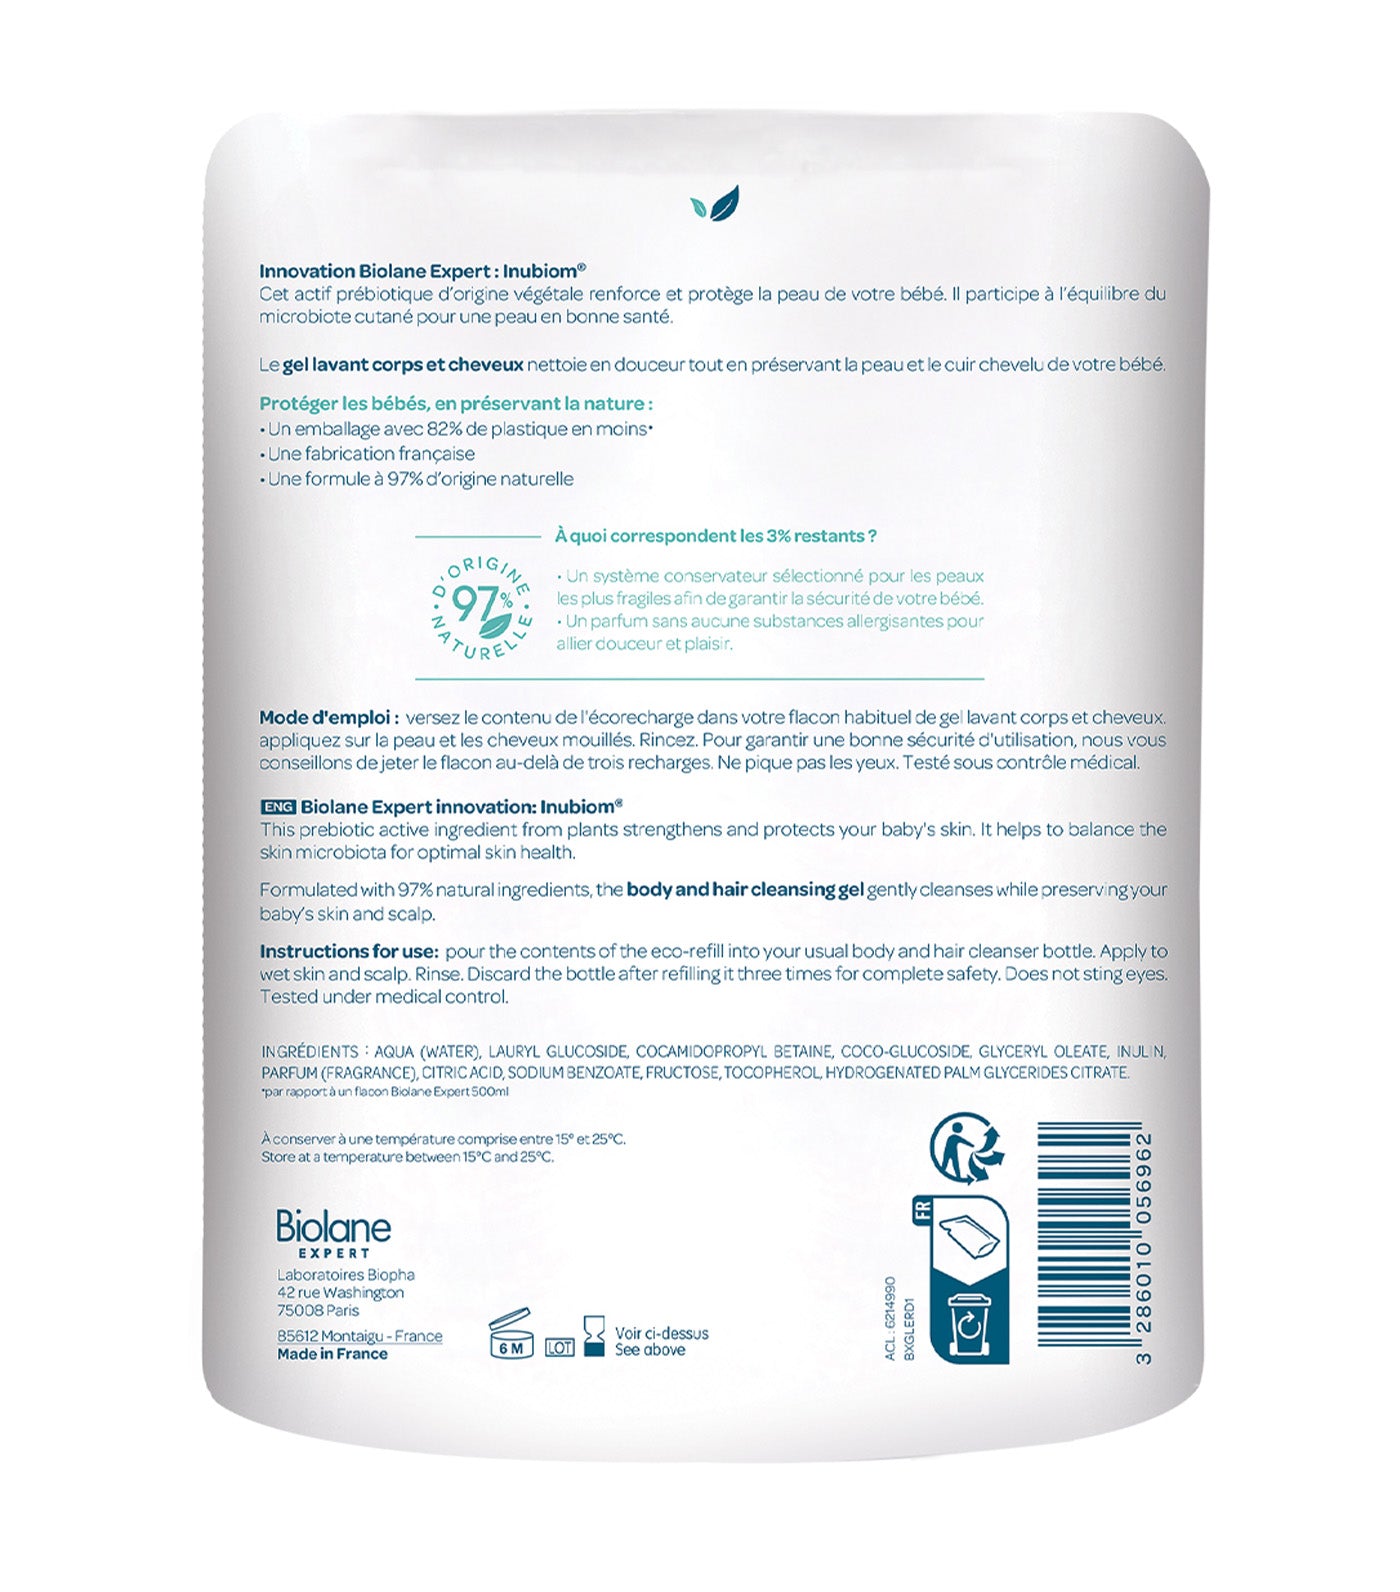 Biolane 2-in-1 Body and Hair Cleanser Eco-Refill Pack 500ml